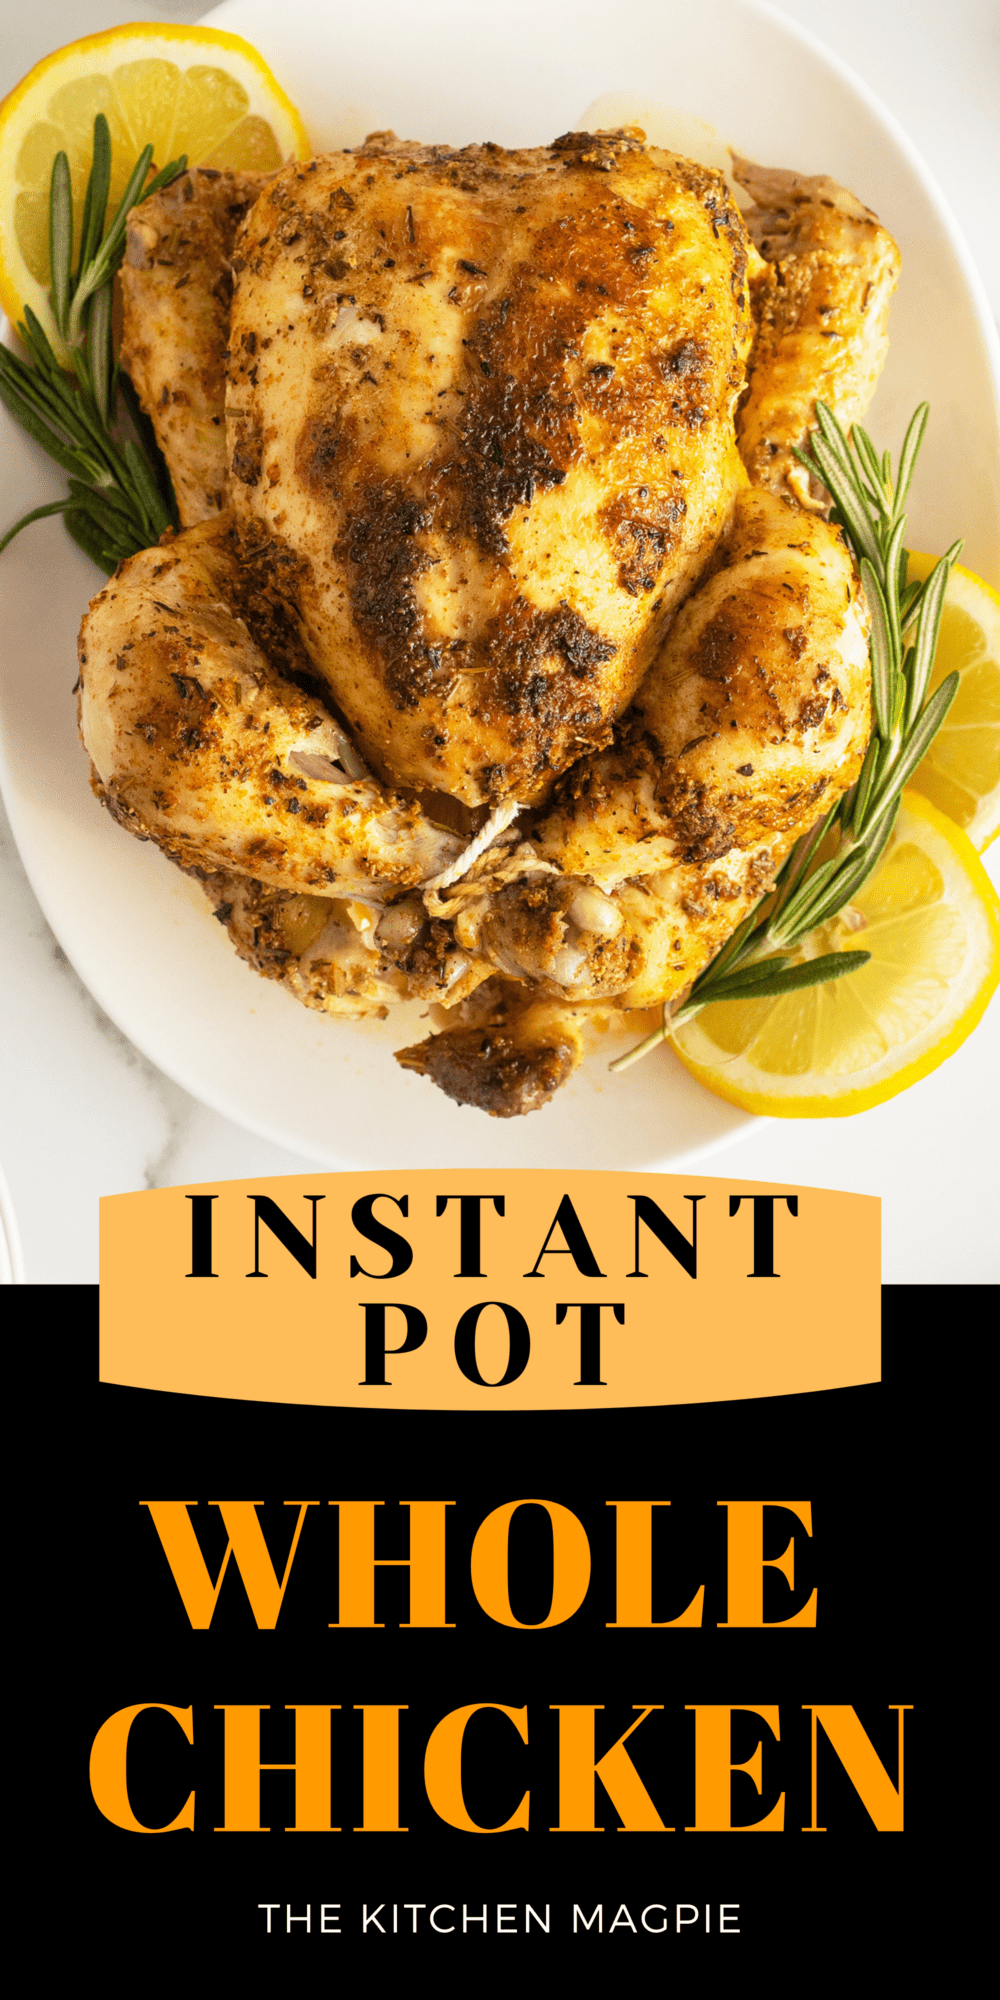 Making a whole chicken covered in spices in your instant pot is quick and easy for a weeknight dinner.